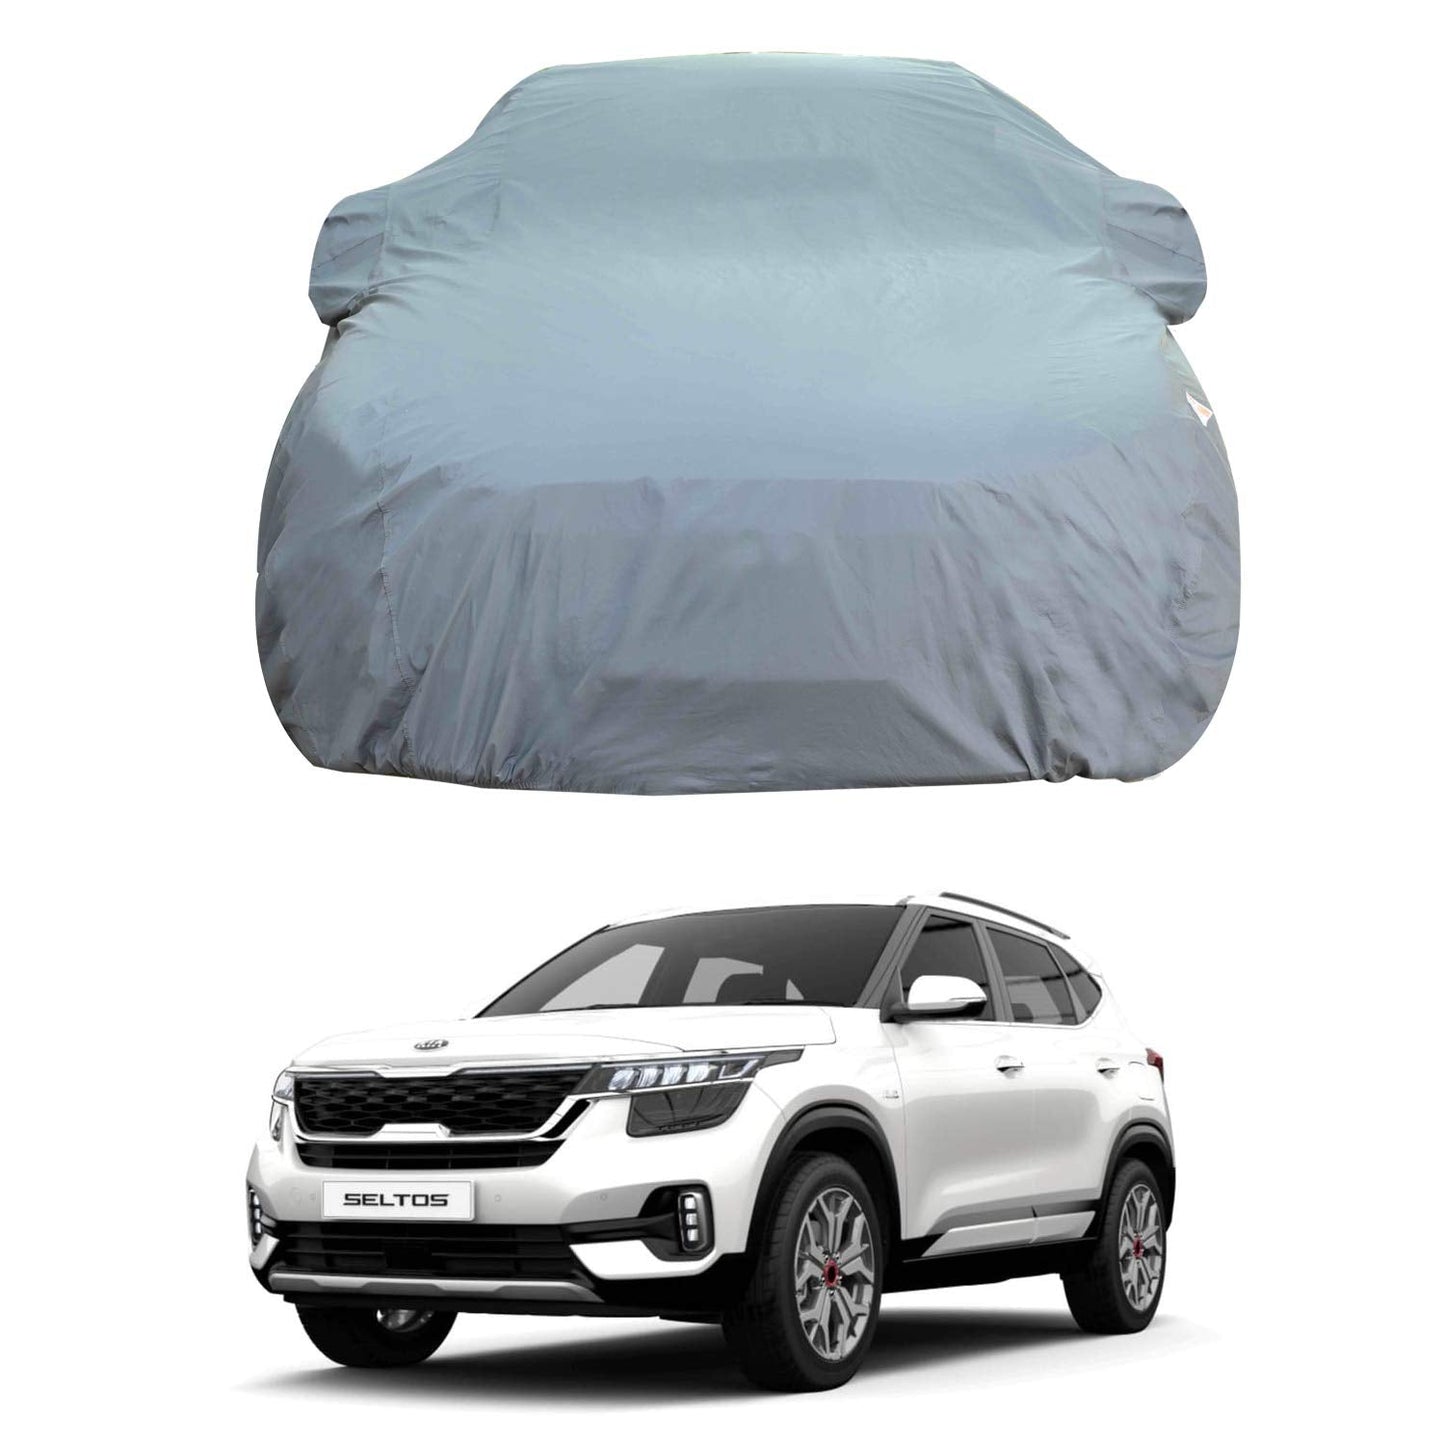 Oshotto Dark Grey 100% Anti Reflective, dustproof and Water Proof Car Body Cover with Mirror Pockets For KIA Seltos